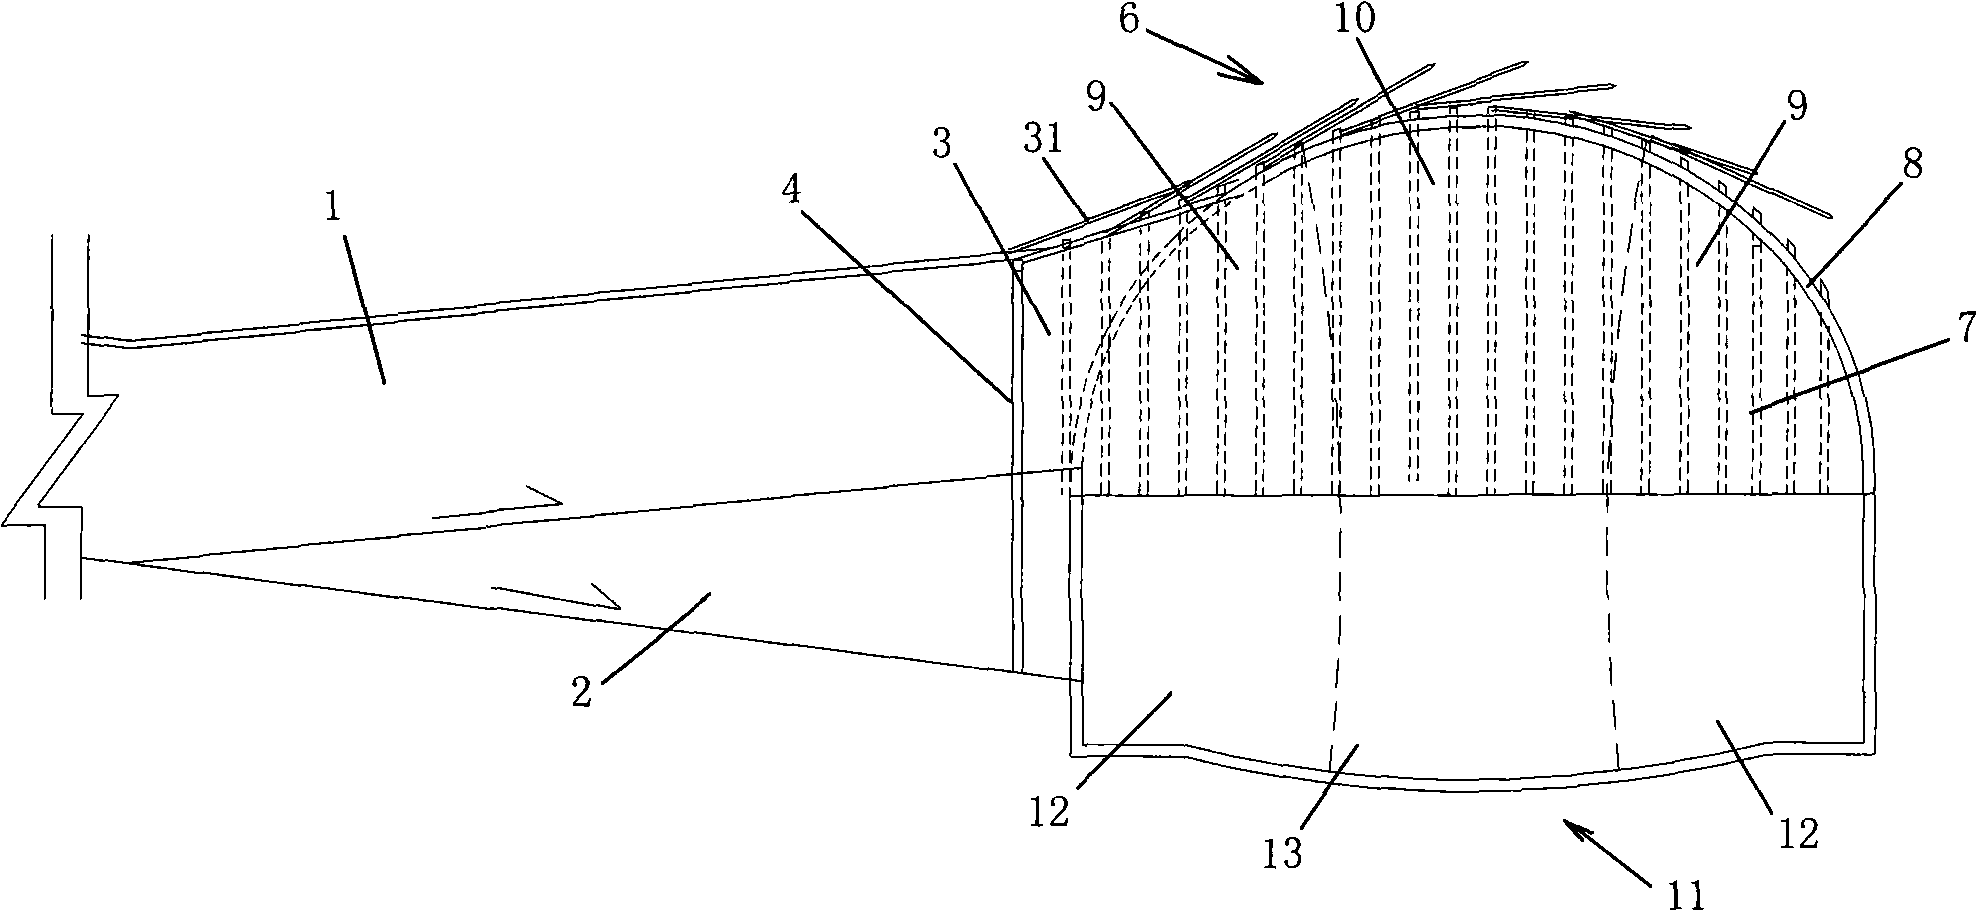 Execution method for feeding tiny tunnel into ultra heavy section tunnel transversally